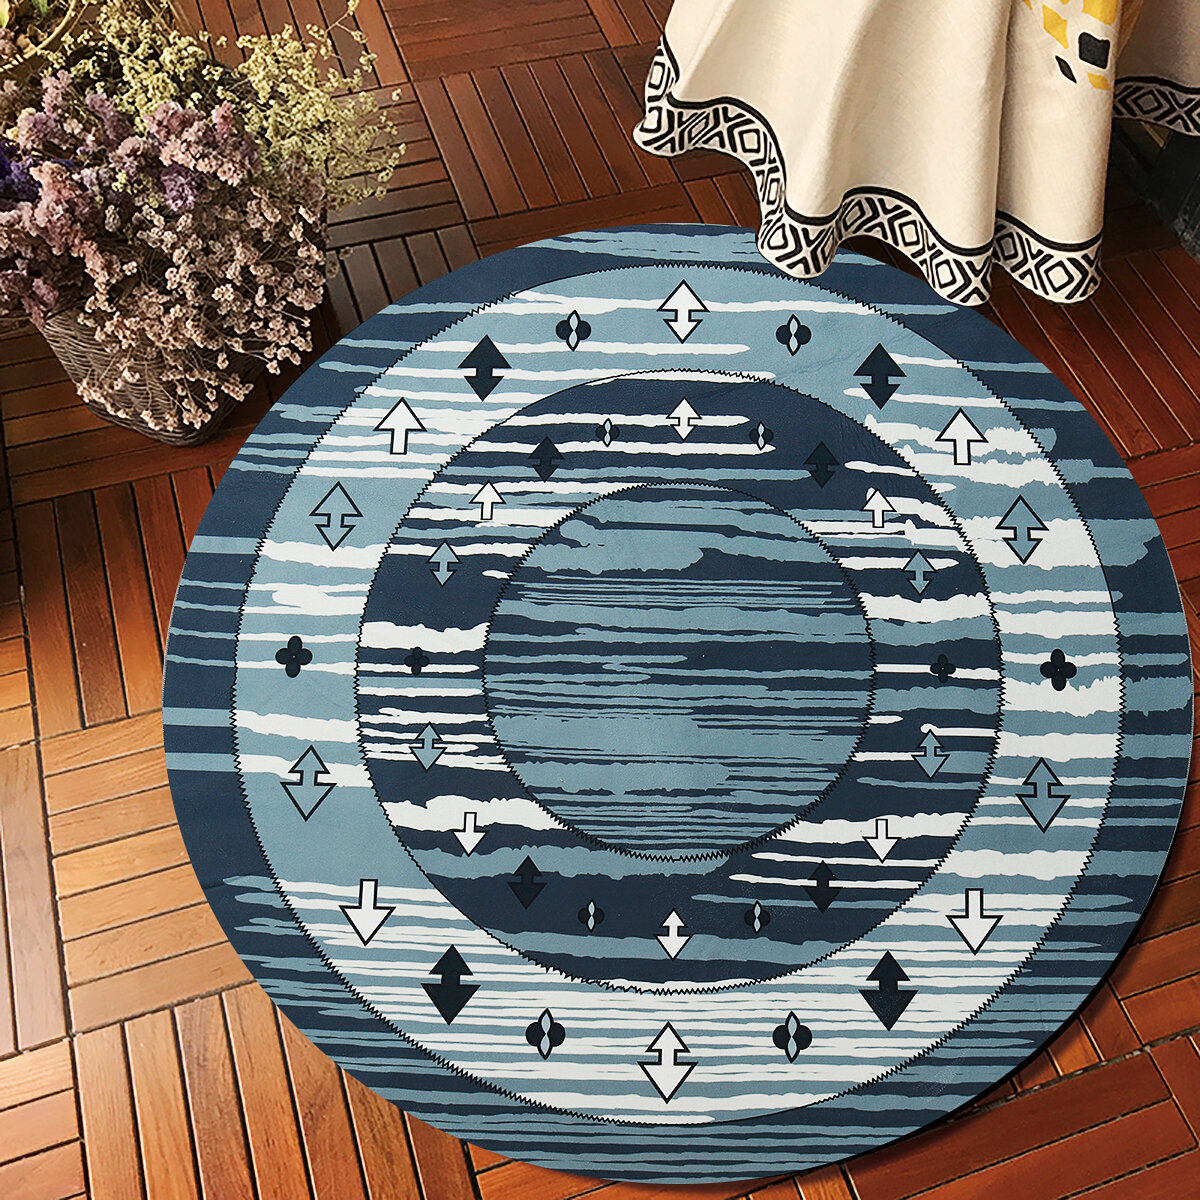 Circular Round Rugs Floor Carpets Small Extra Large Circle Mats Modern for Home Living Room Decoration